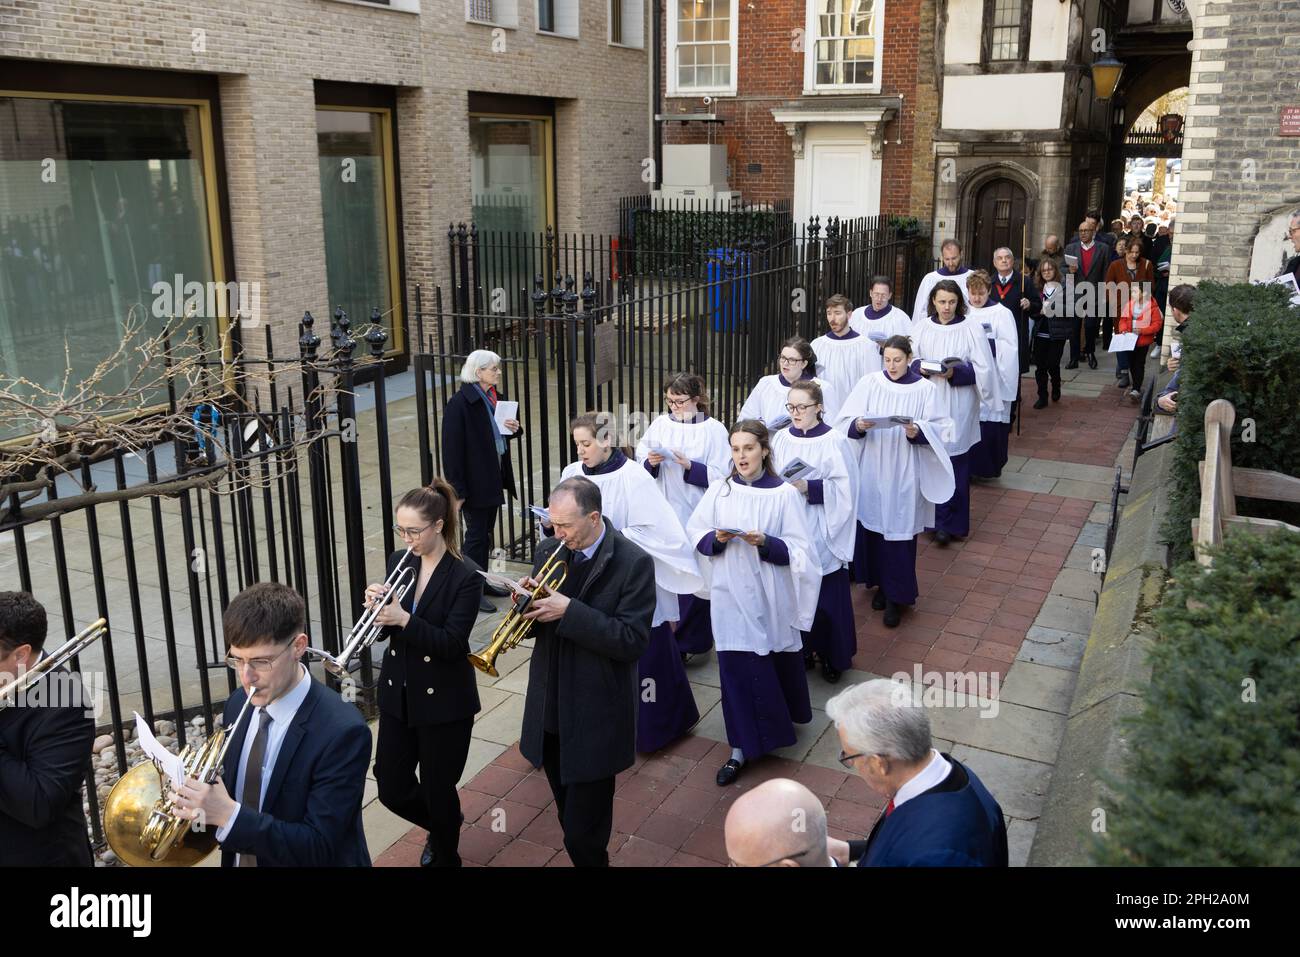 London, UK. March 24, 2023: Choral eucharist & procession from St Bartholomew's hospital to celebrate the 900th anniversary of the hospital and St Bartholomew the Great church in the City of London. Stock Photo